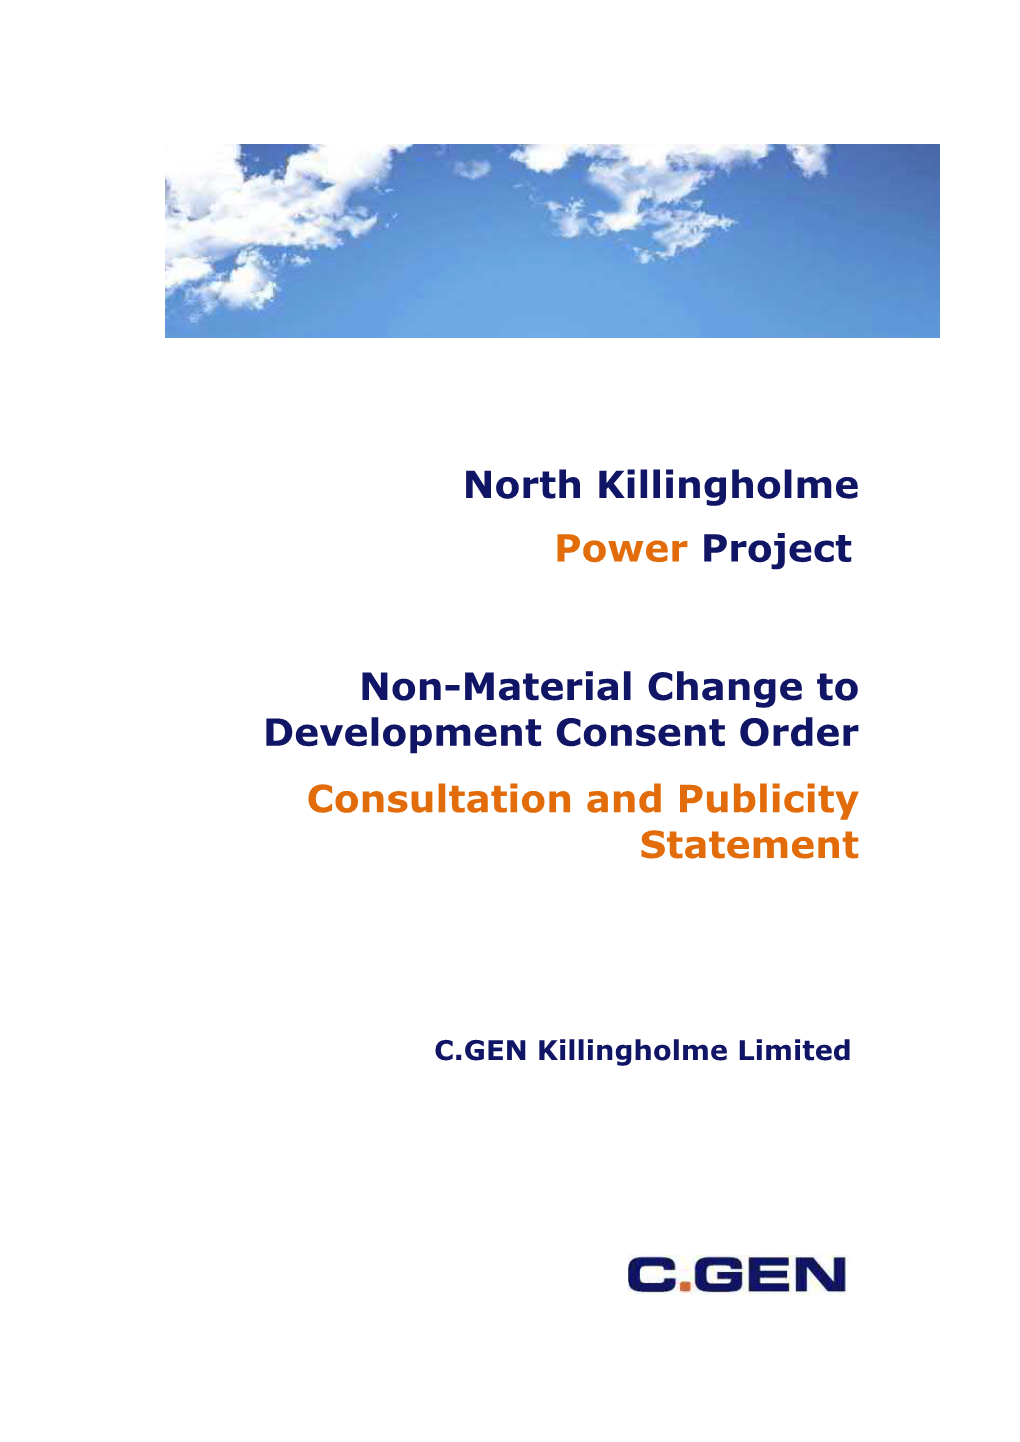 North Killingholme Power Project Non-Material Change To